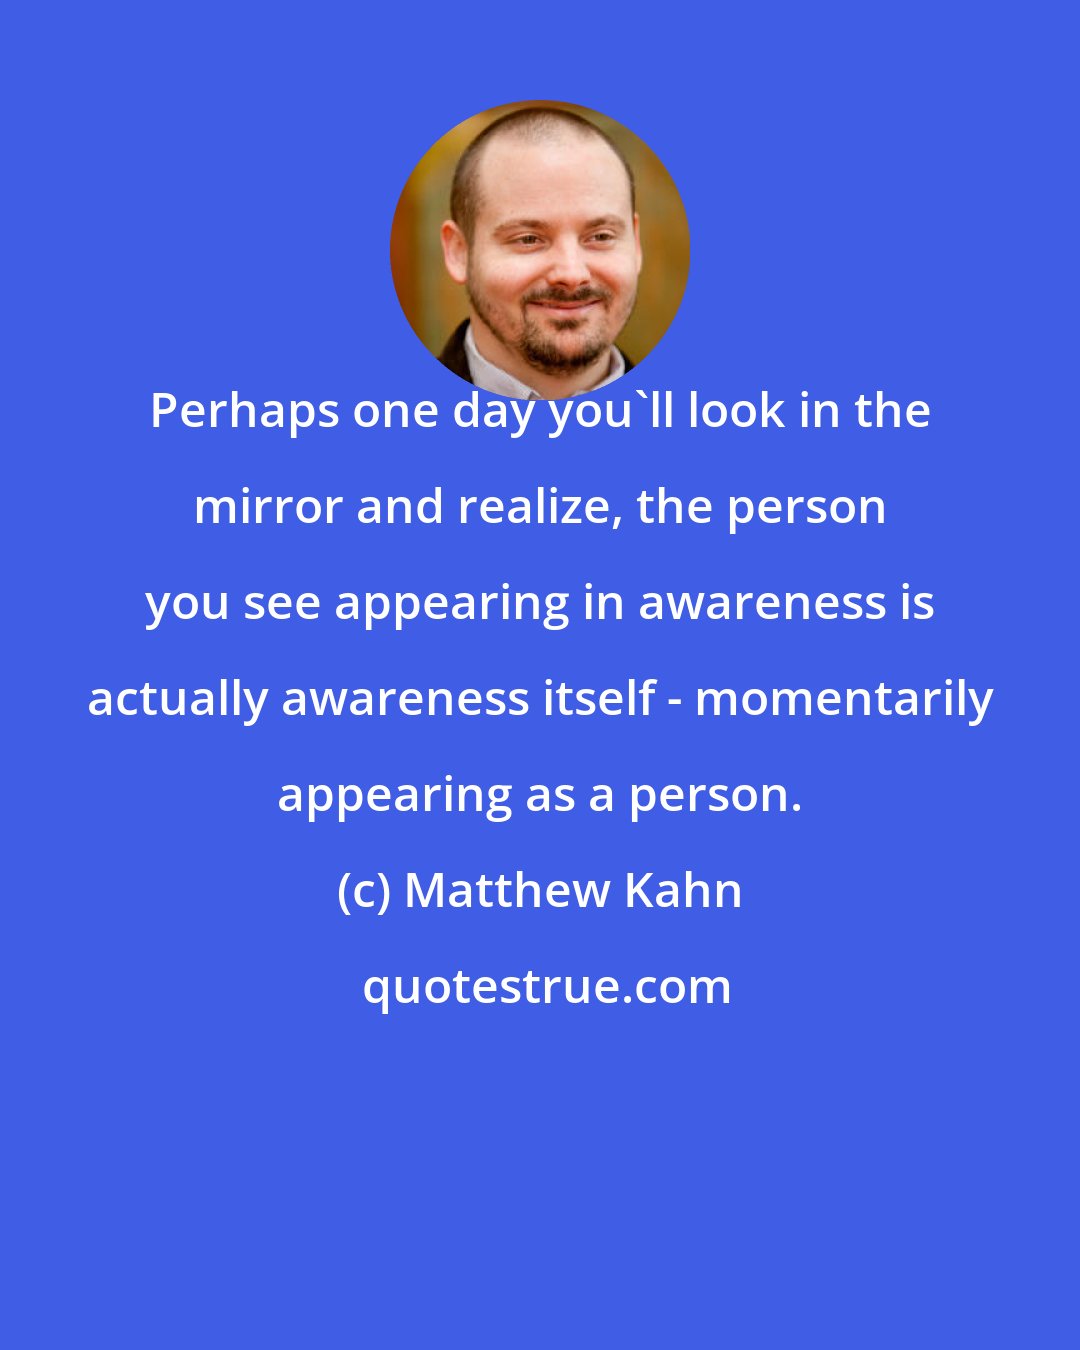 Matthew Kahn: Perhaps one day you'll look in the mirror and realize, the person you see appearing in awareness is actually awareness itself - momentarily appearing as a person.